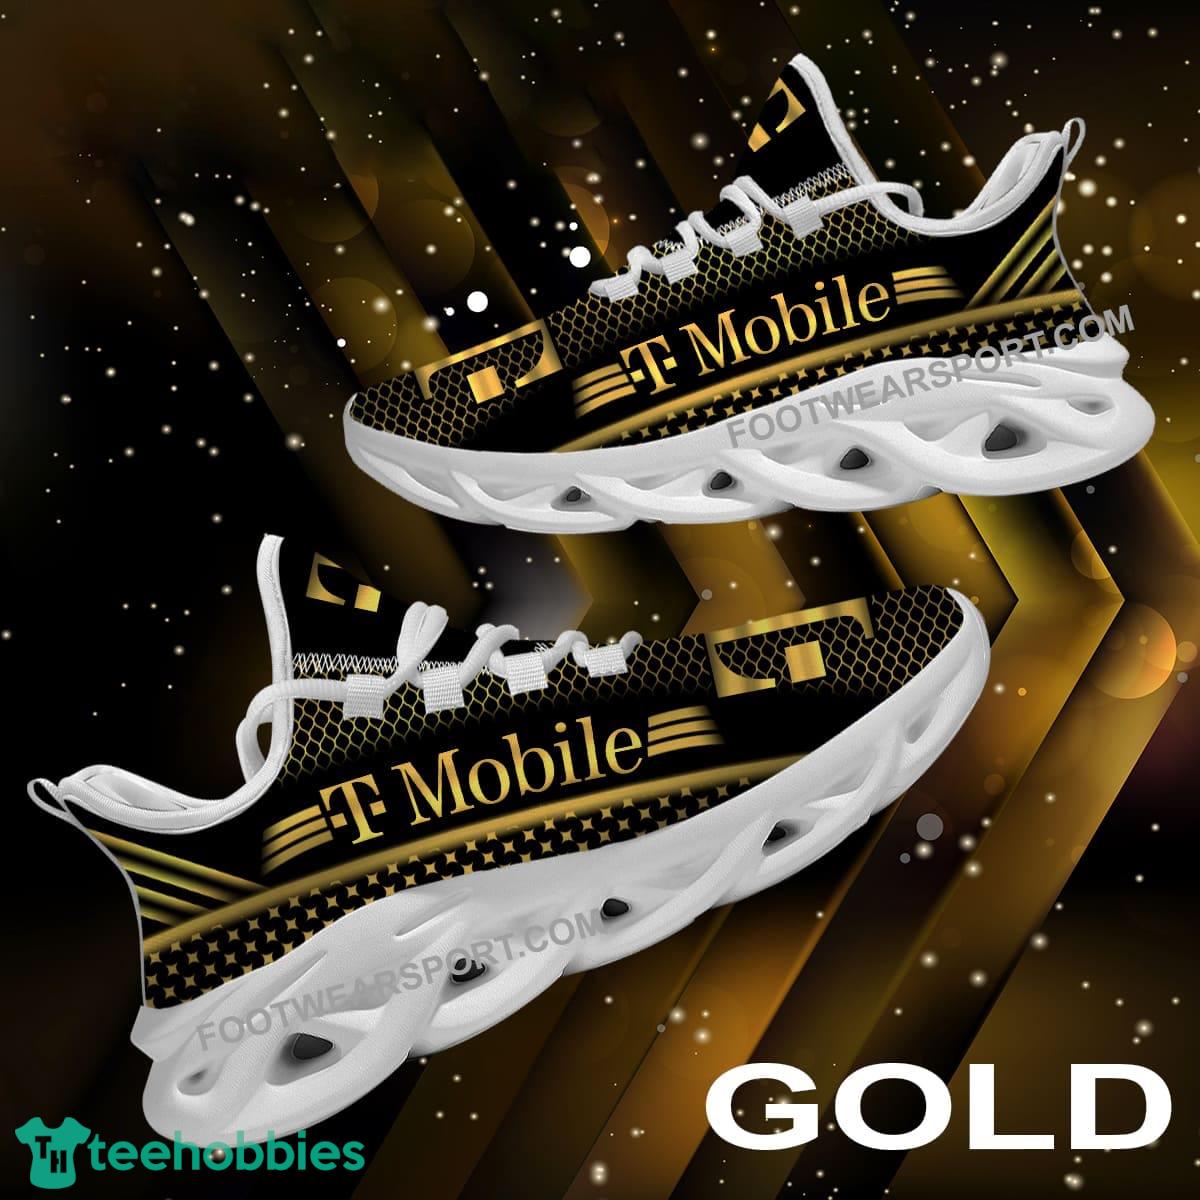 T Mobile Max Soul Shoes Gold Running Sneaker Trendsetting For Fans Gift - T Mobile Max Soul Shoes Gold Running Sneaker Trendsetting For Fans Gift